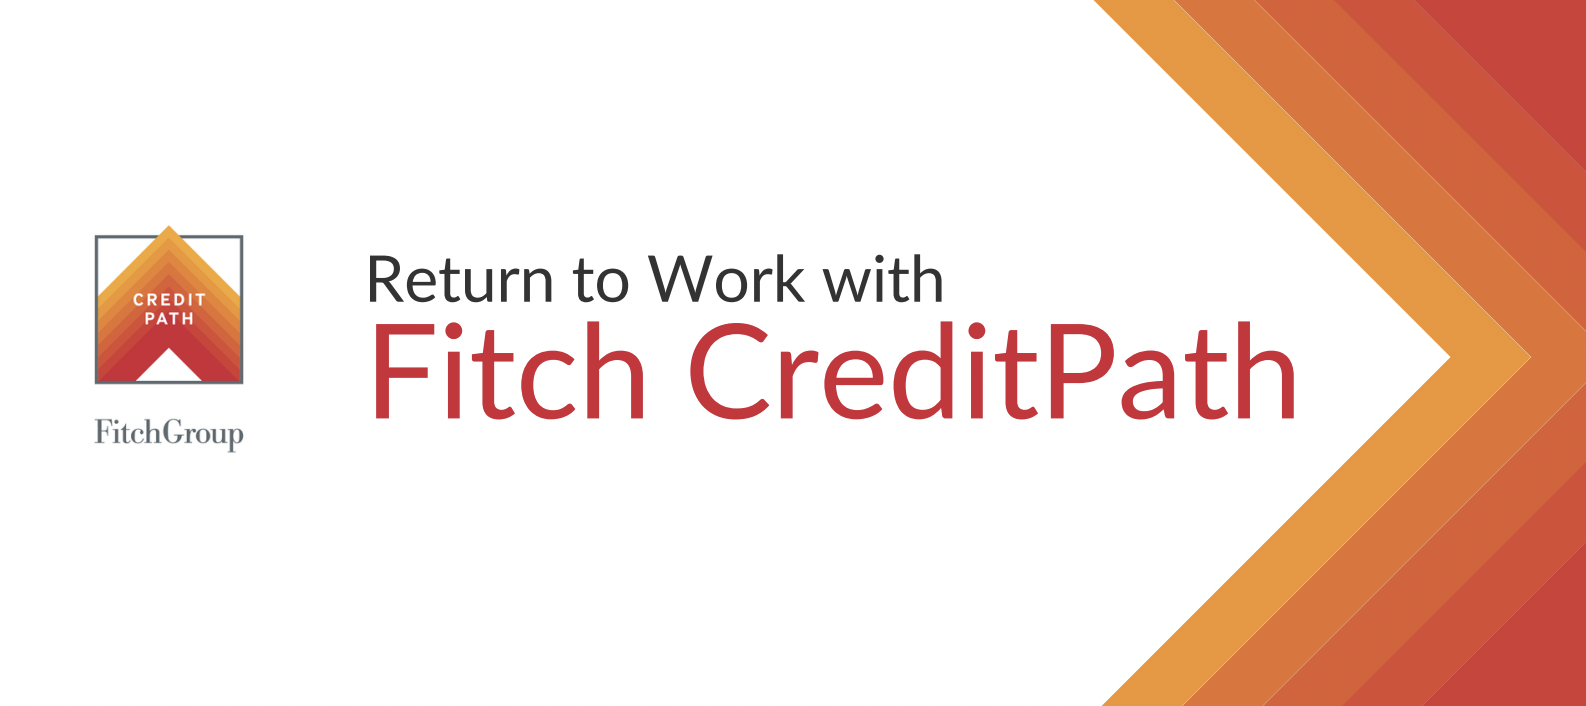 Fitch CreditPath Conference for return to work